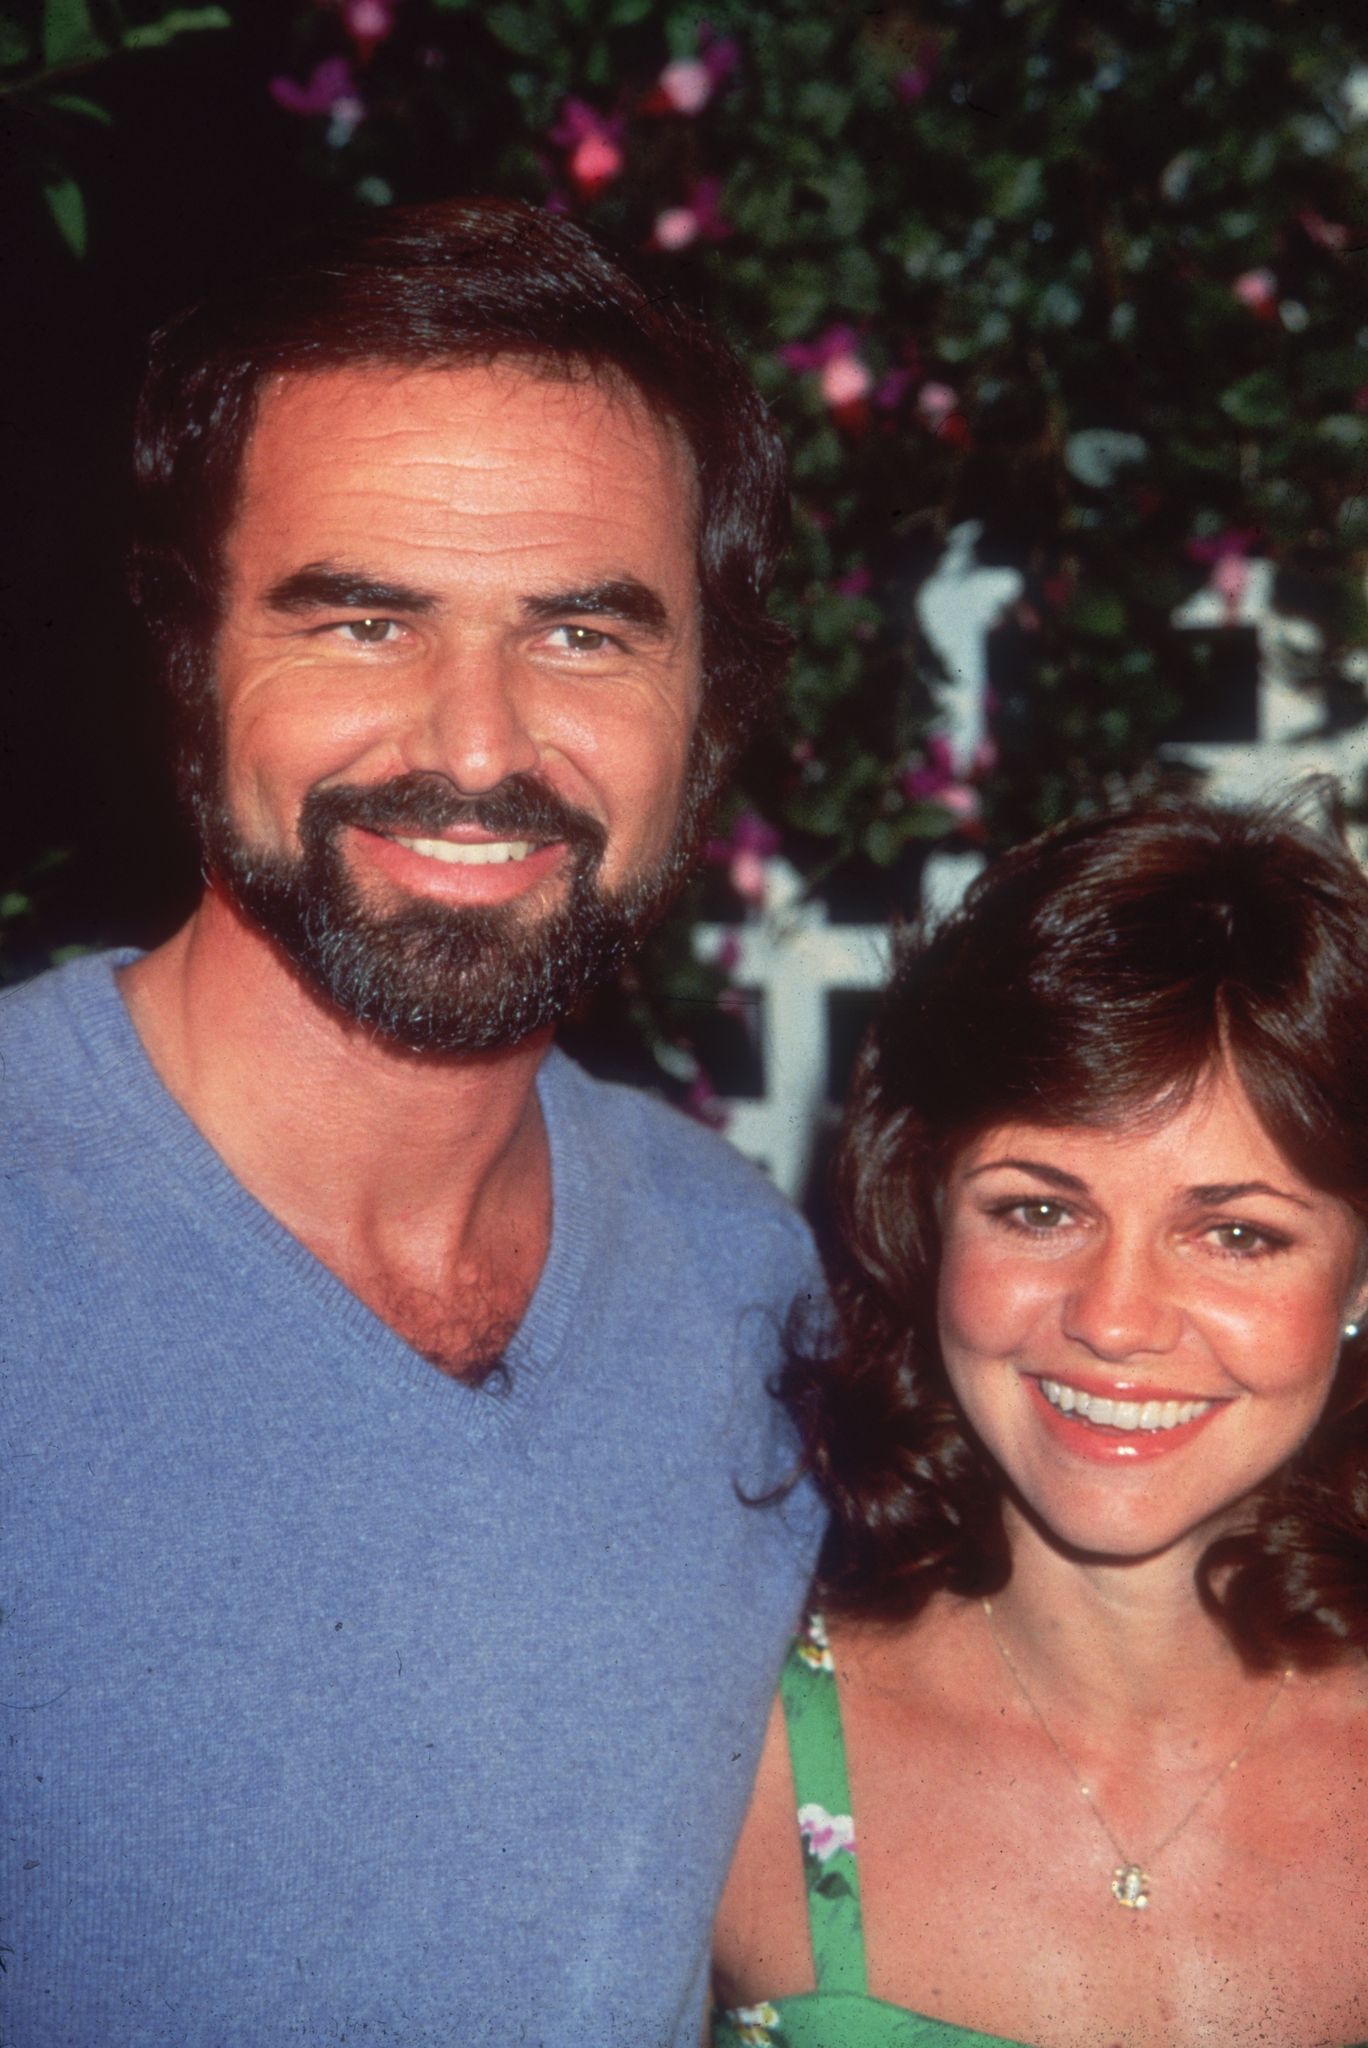 American actor Burt Reynolds smiles with actress Sally Field, while attending an outdoor event on August 1977. | Photo: Getty Images